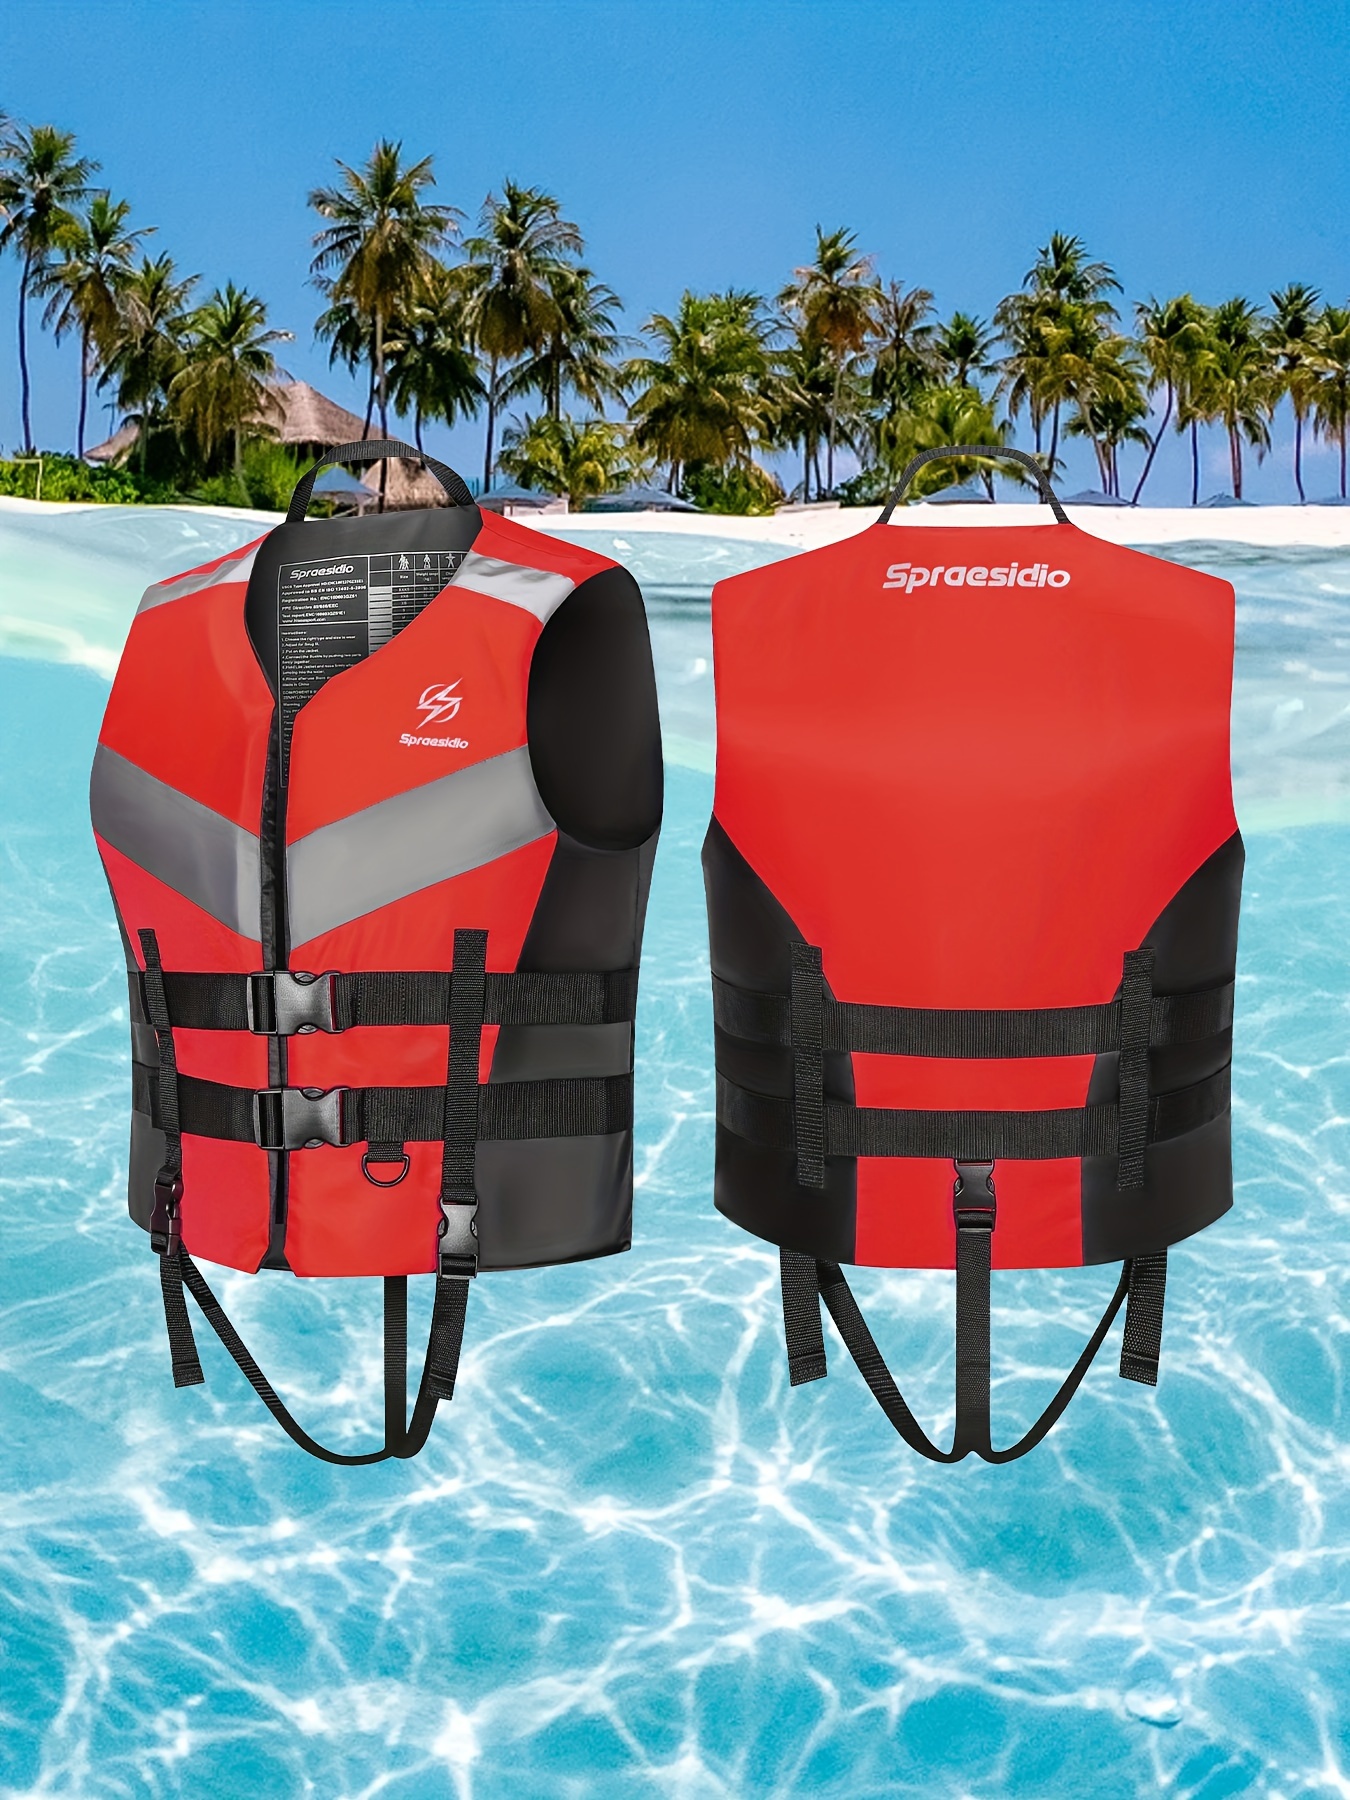 Novashion Automatic Inflatable Life Jacket with Reflectors, PFD Survival Buoyancy Vest for Boating, Fishing, Sailing, Surfing, Paddling and Swimming